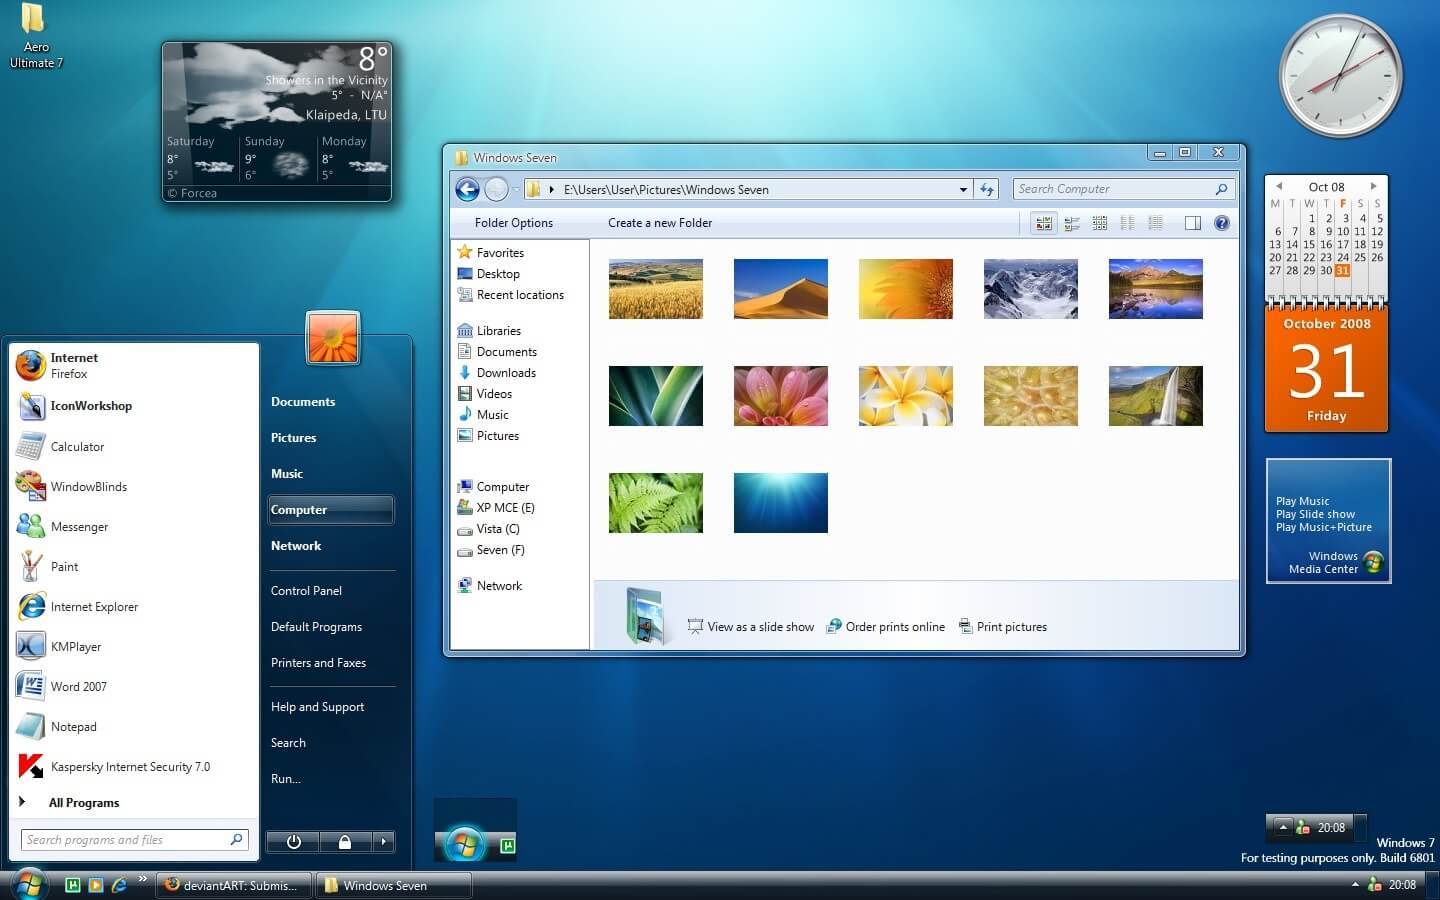 Download drivers for windows 7 professional